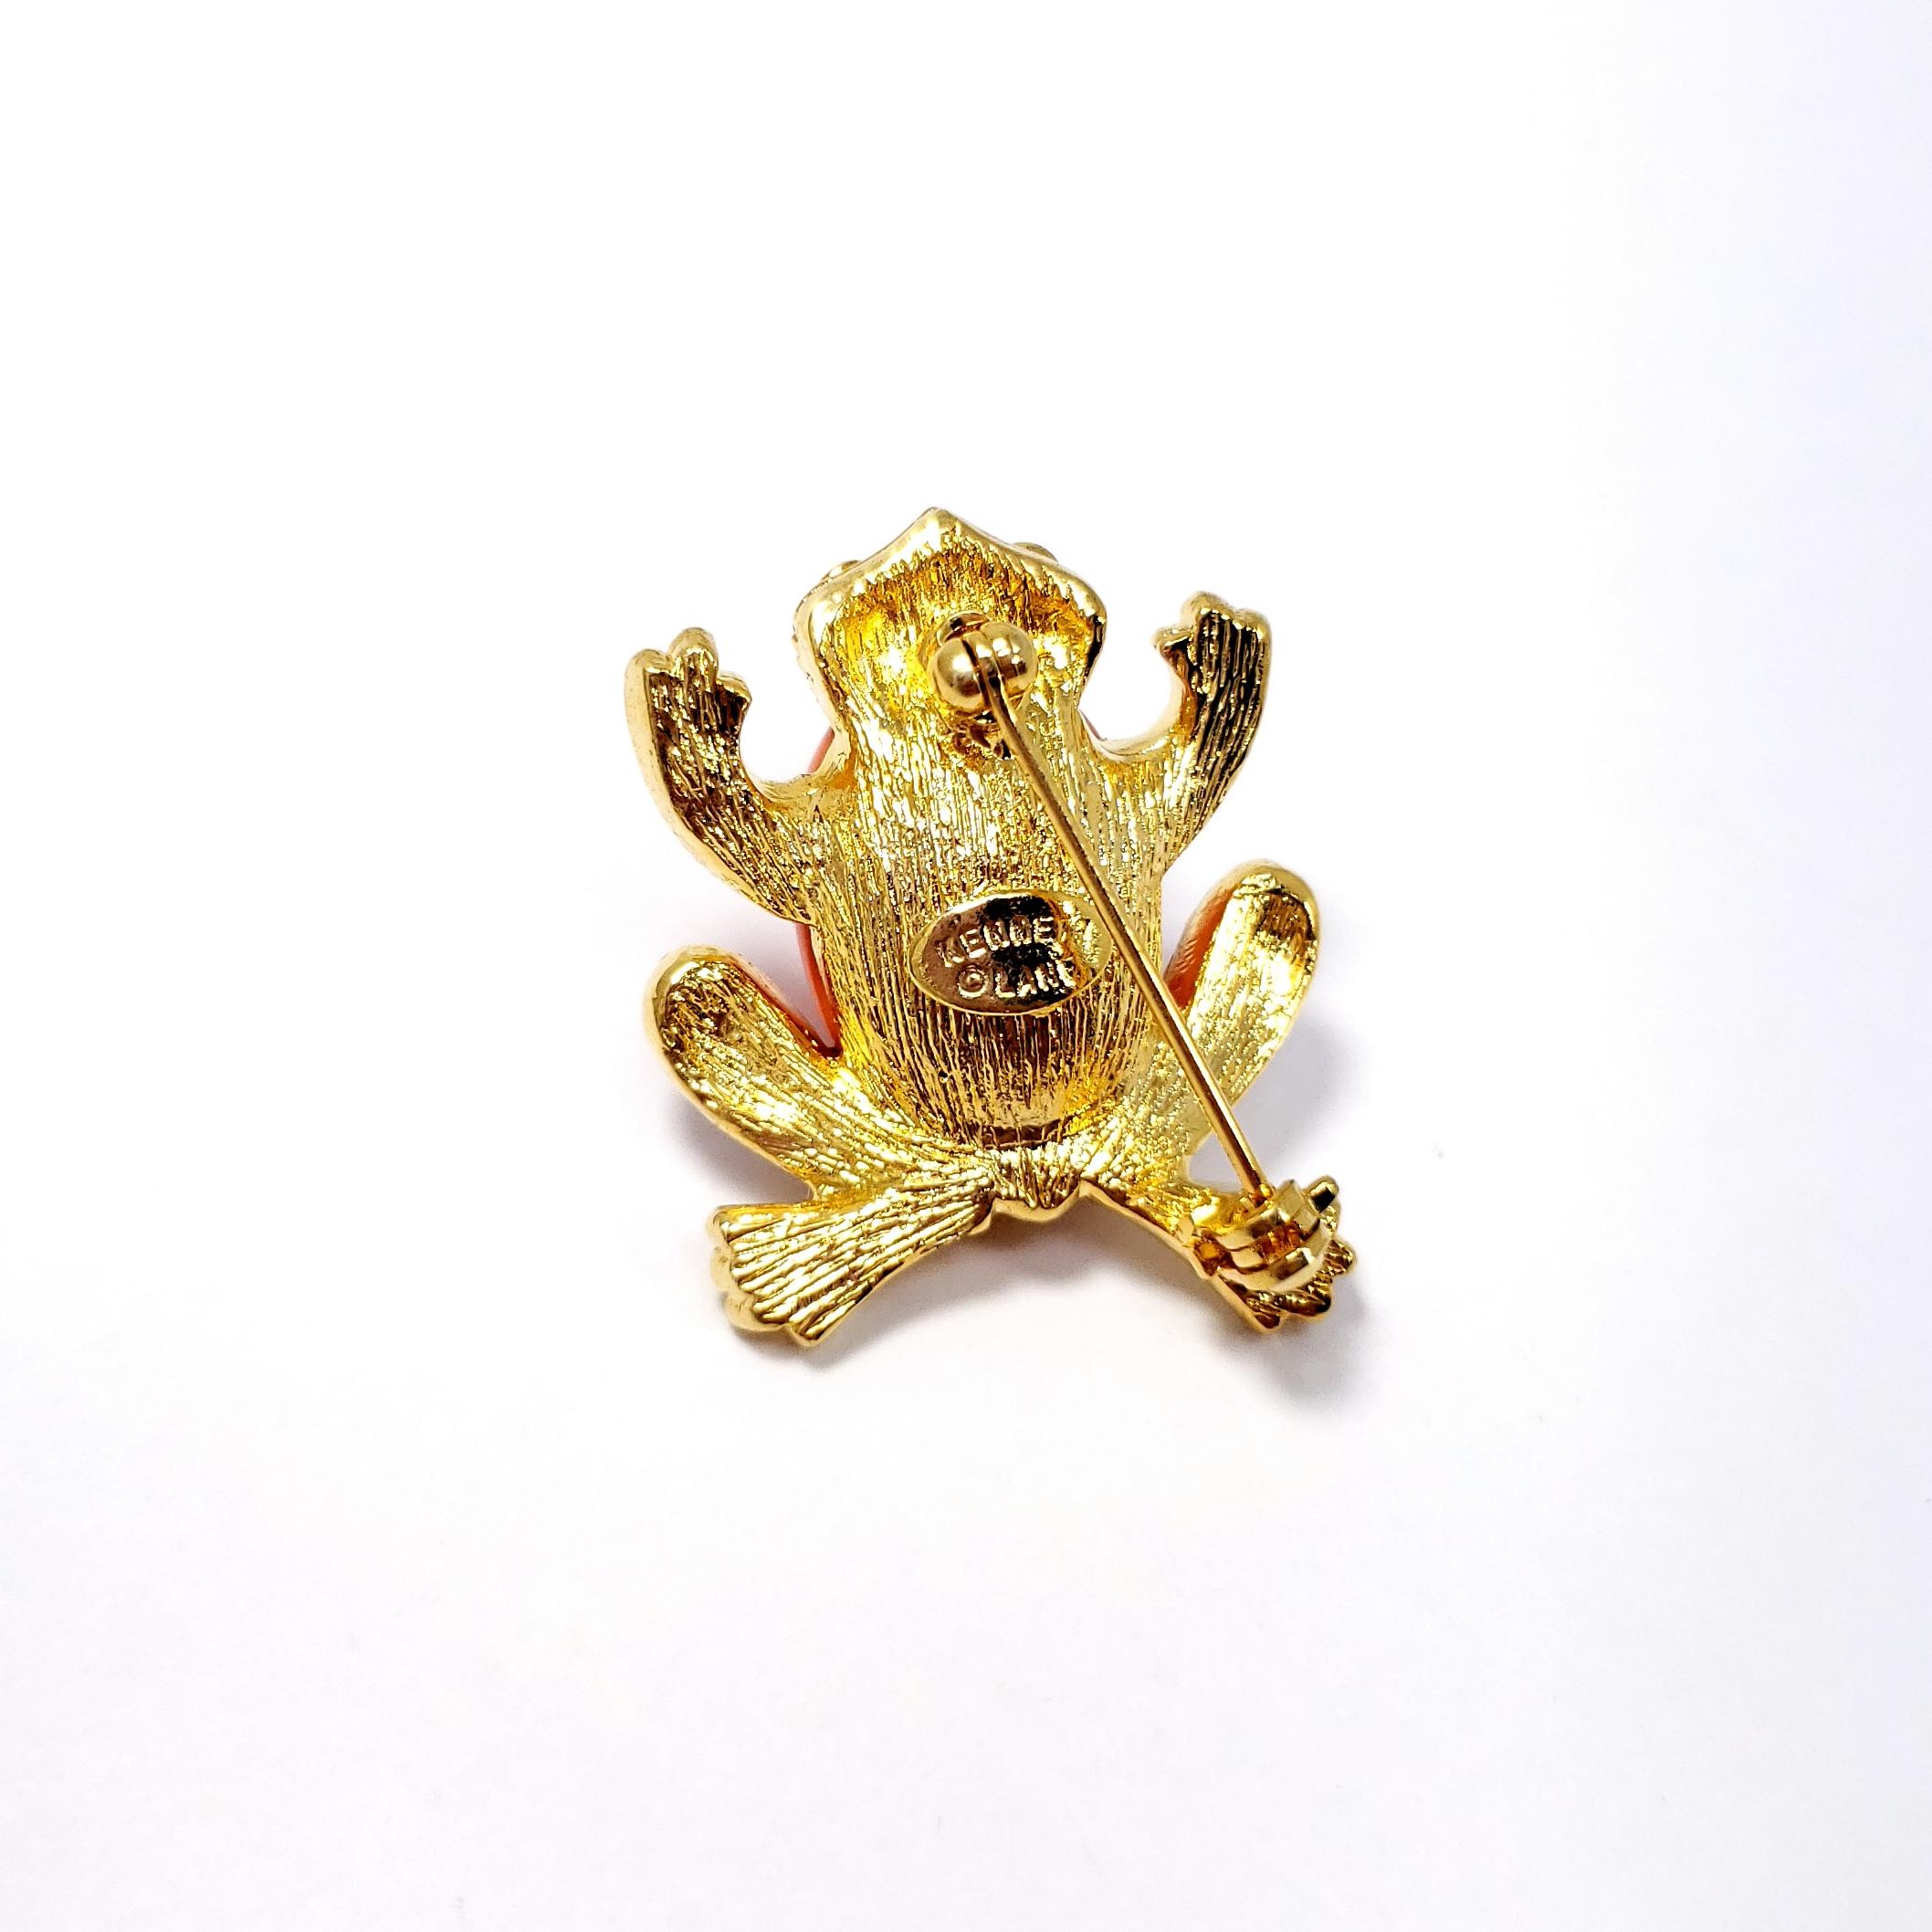 KJL Kenneth Jay Lane Embellished Coral Cabochon Frog Pin Brooch in Gold In New Condition For Sale In Milford, DE